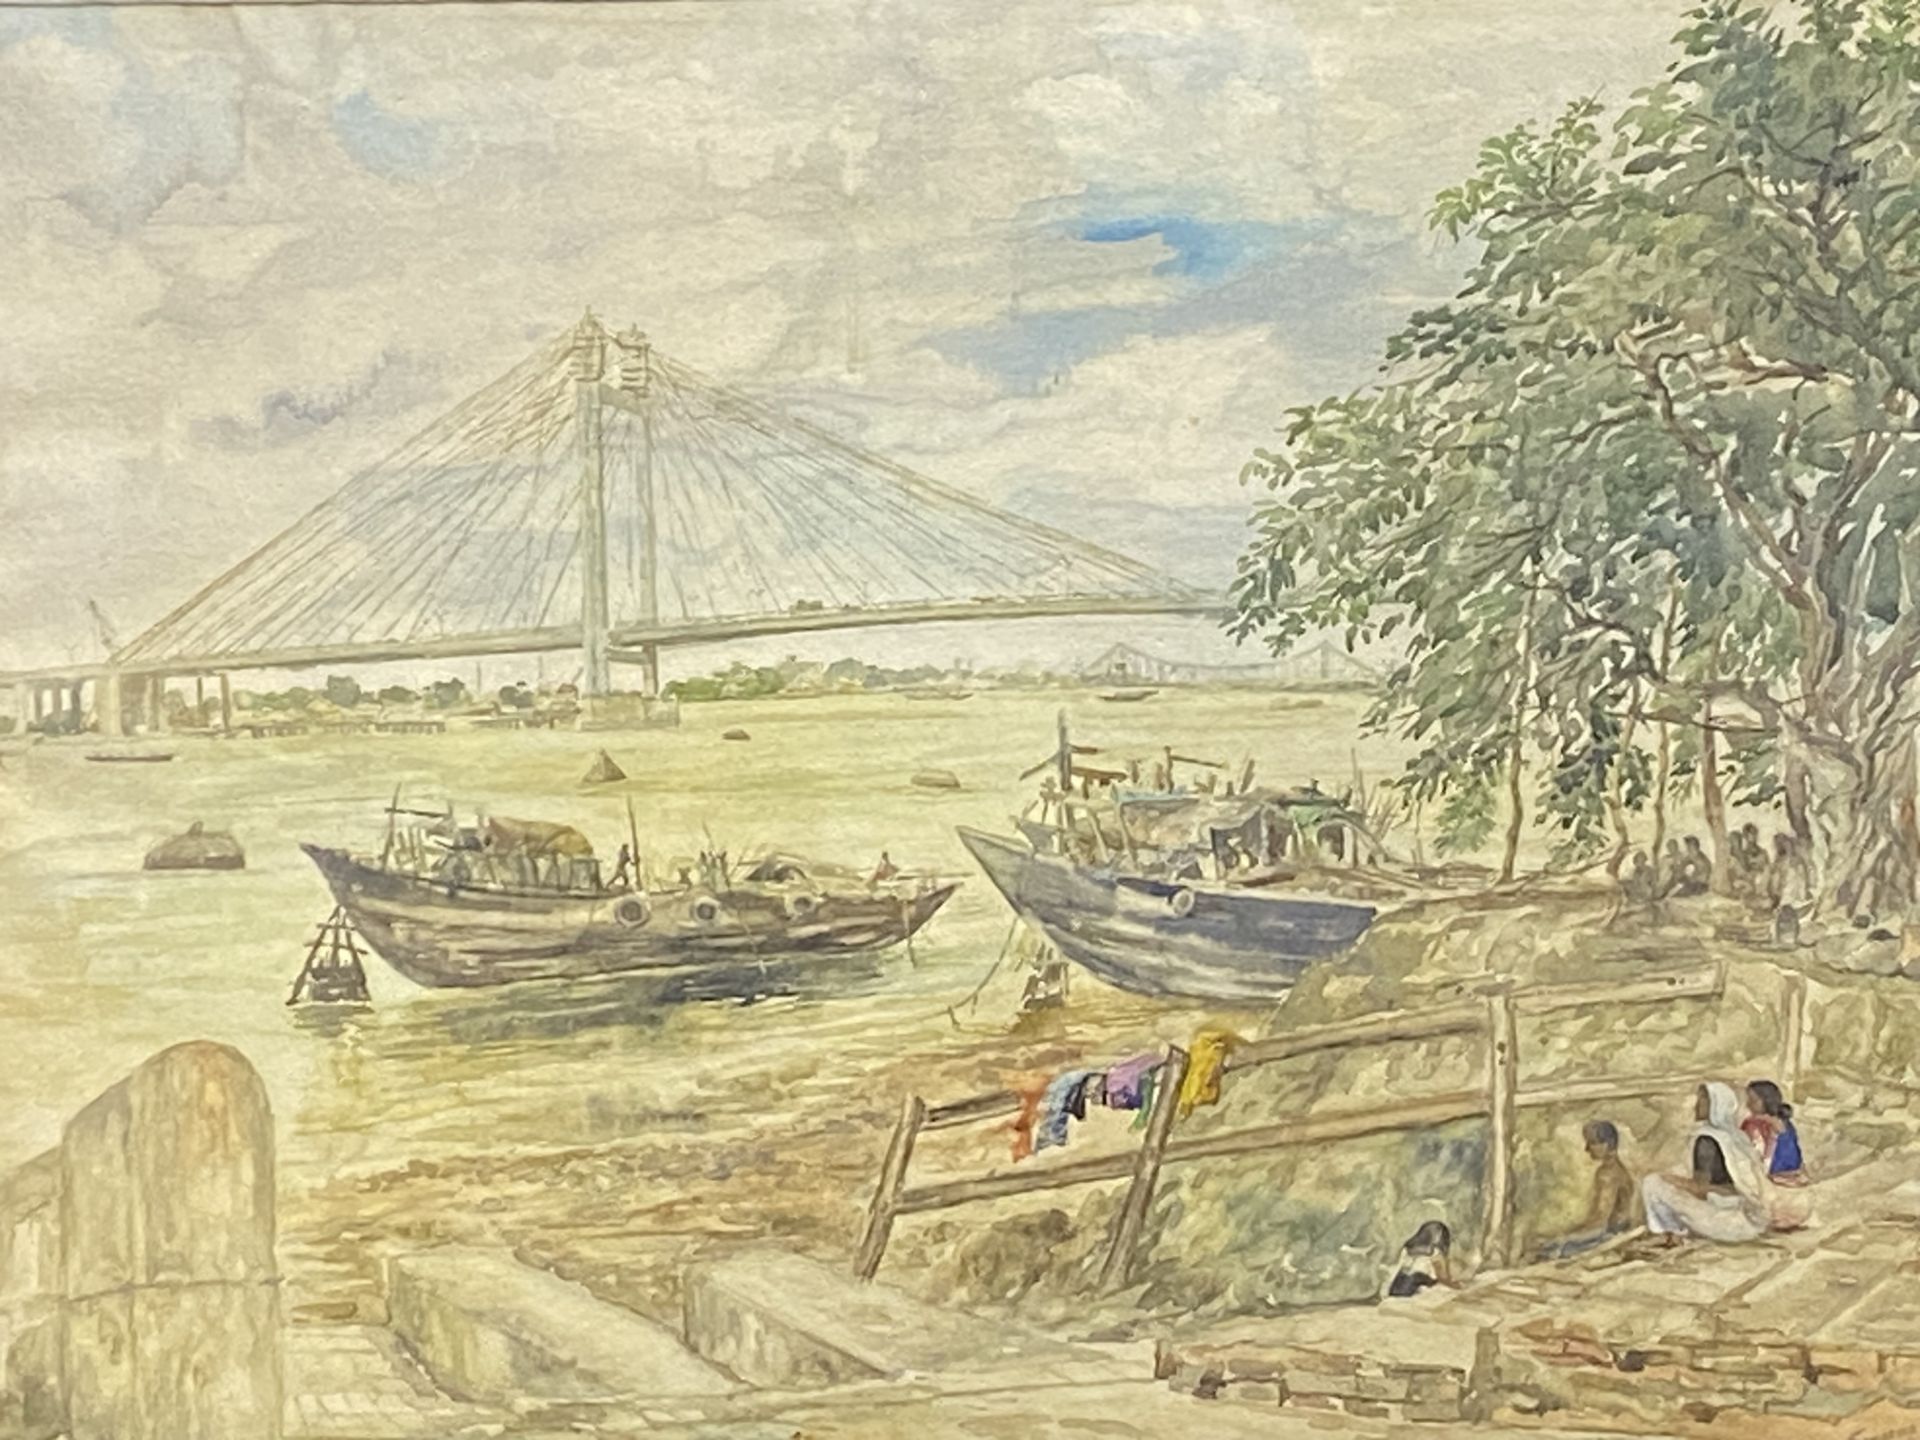 Framed and glazed 19th century watercolour of a river scene in India, signed by artist